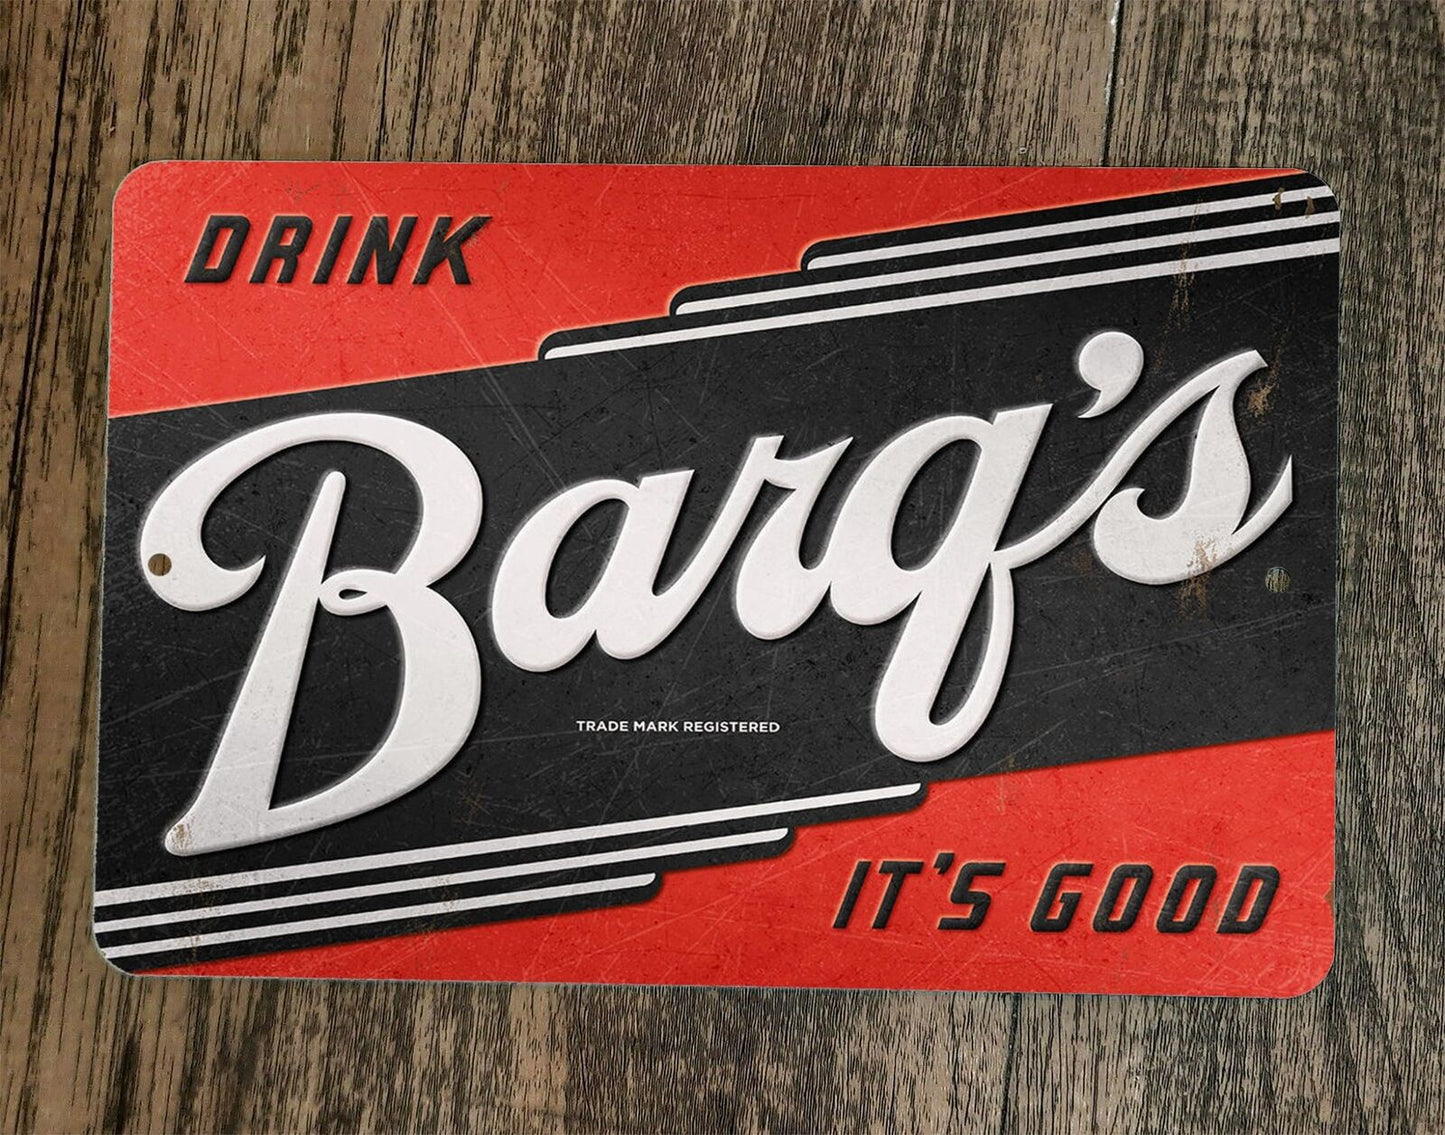 Drink Barqs Its Good Vintage Look Root Beer 8x12 Metal Wall Sign Poster